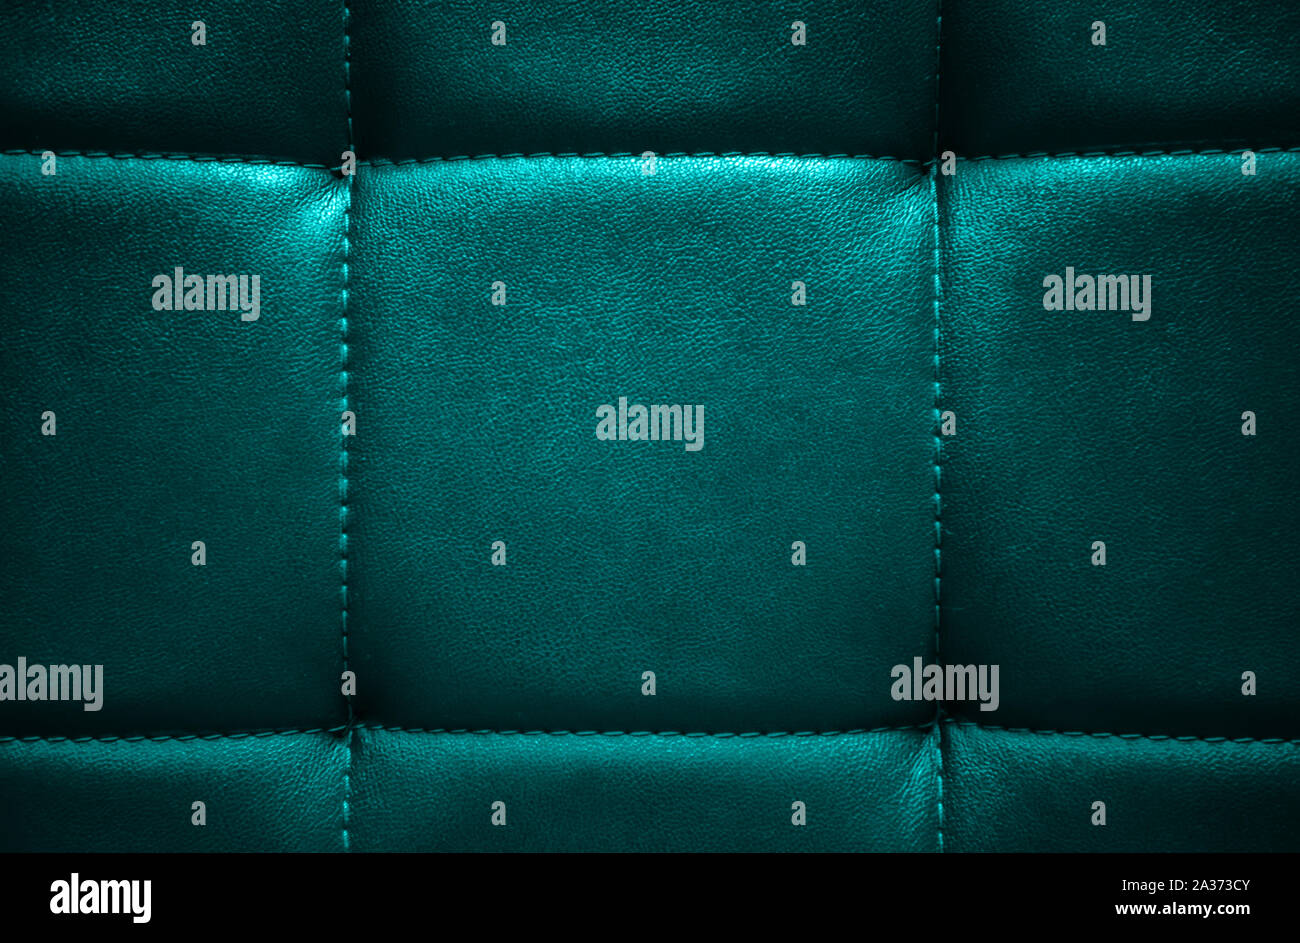 Shiny dark turquoise artificial textured leather stitched with thread. Close-up of sofa surface. View from directly above. Highly detailed background Stock Photo